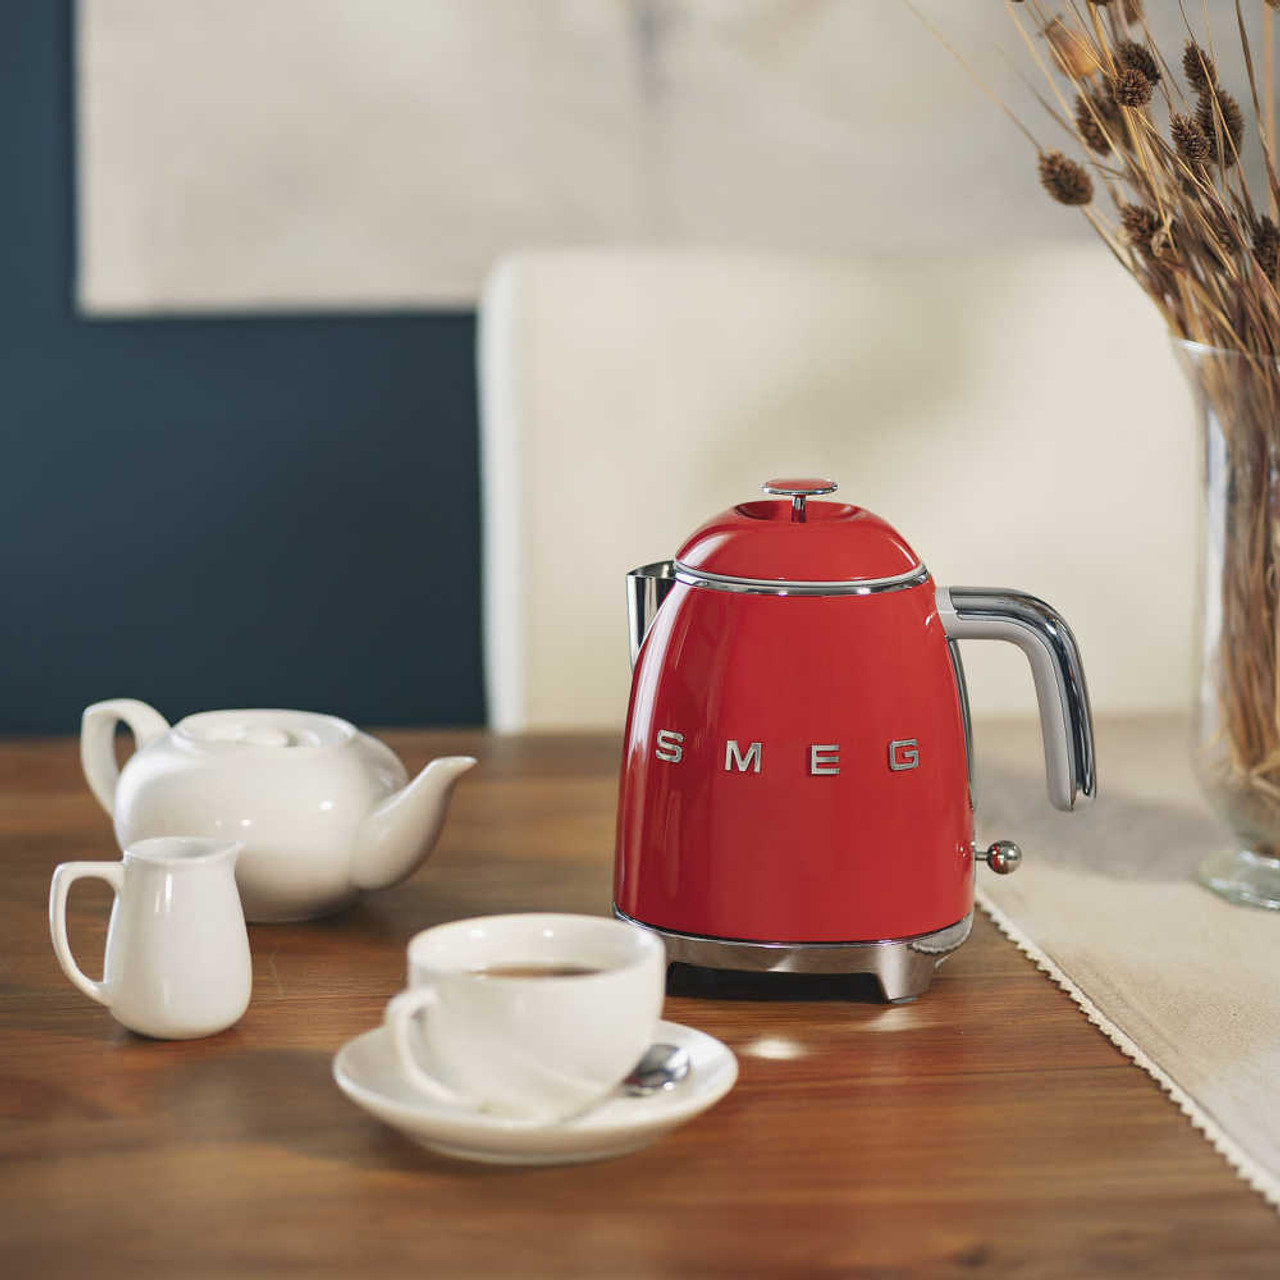 https://cdn11.bigcommerce.com/s-hccytny0od/images/stencil/1280x1280/products/4253/16113/smeg-mini-electric-kettle-red-3__11603.1630247841.jpg?c=2?imbypass=on